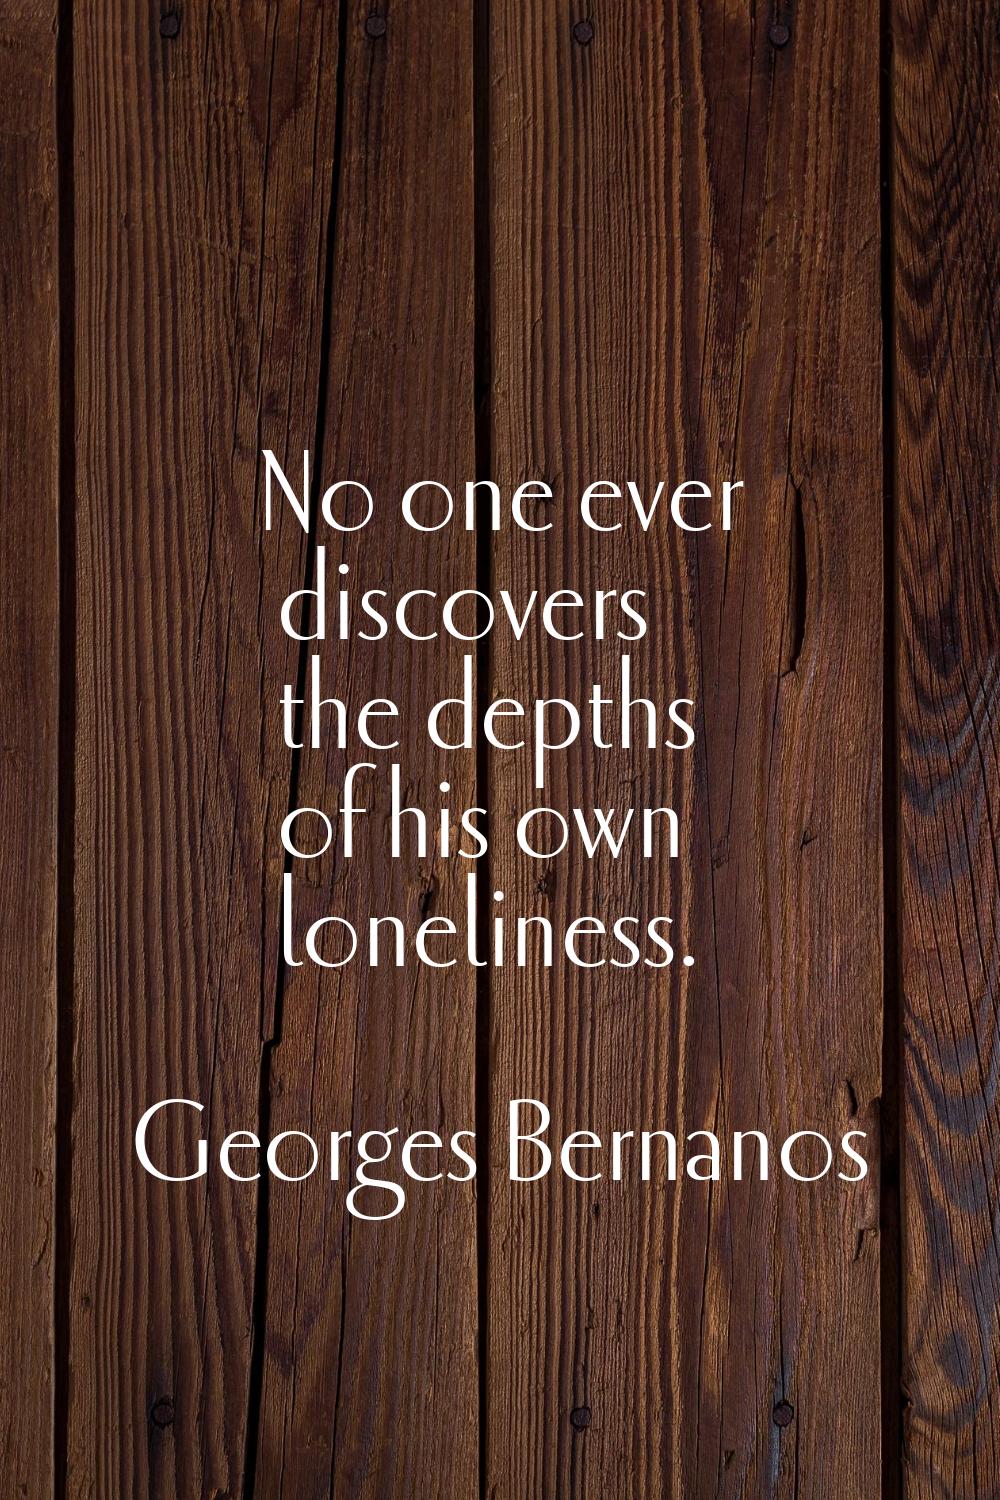 No one ever discovers the depths of his own loneliness.